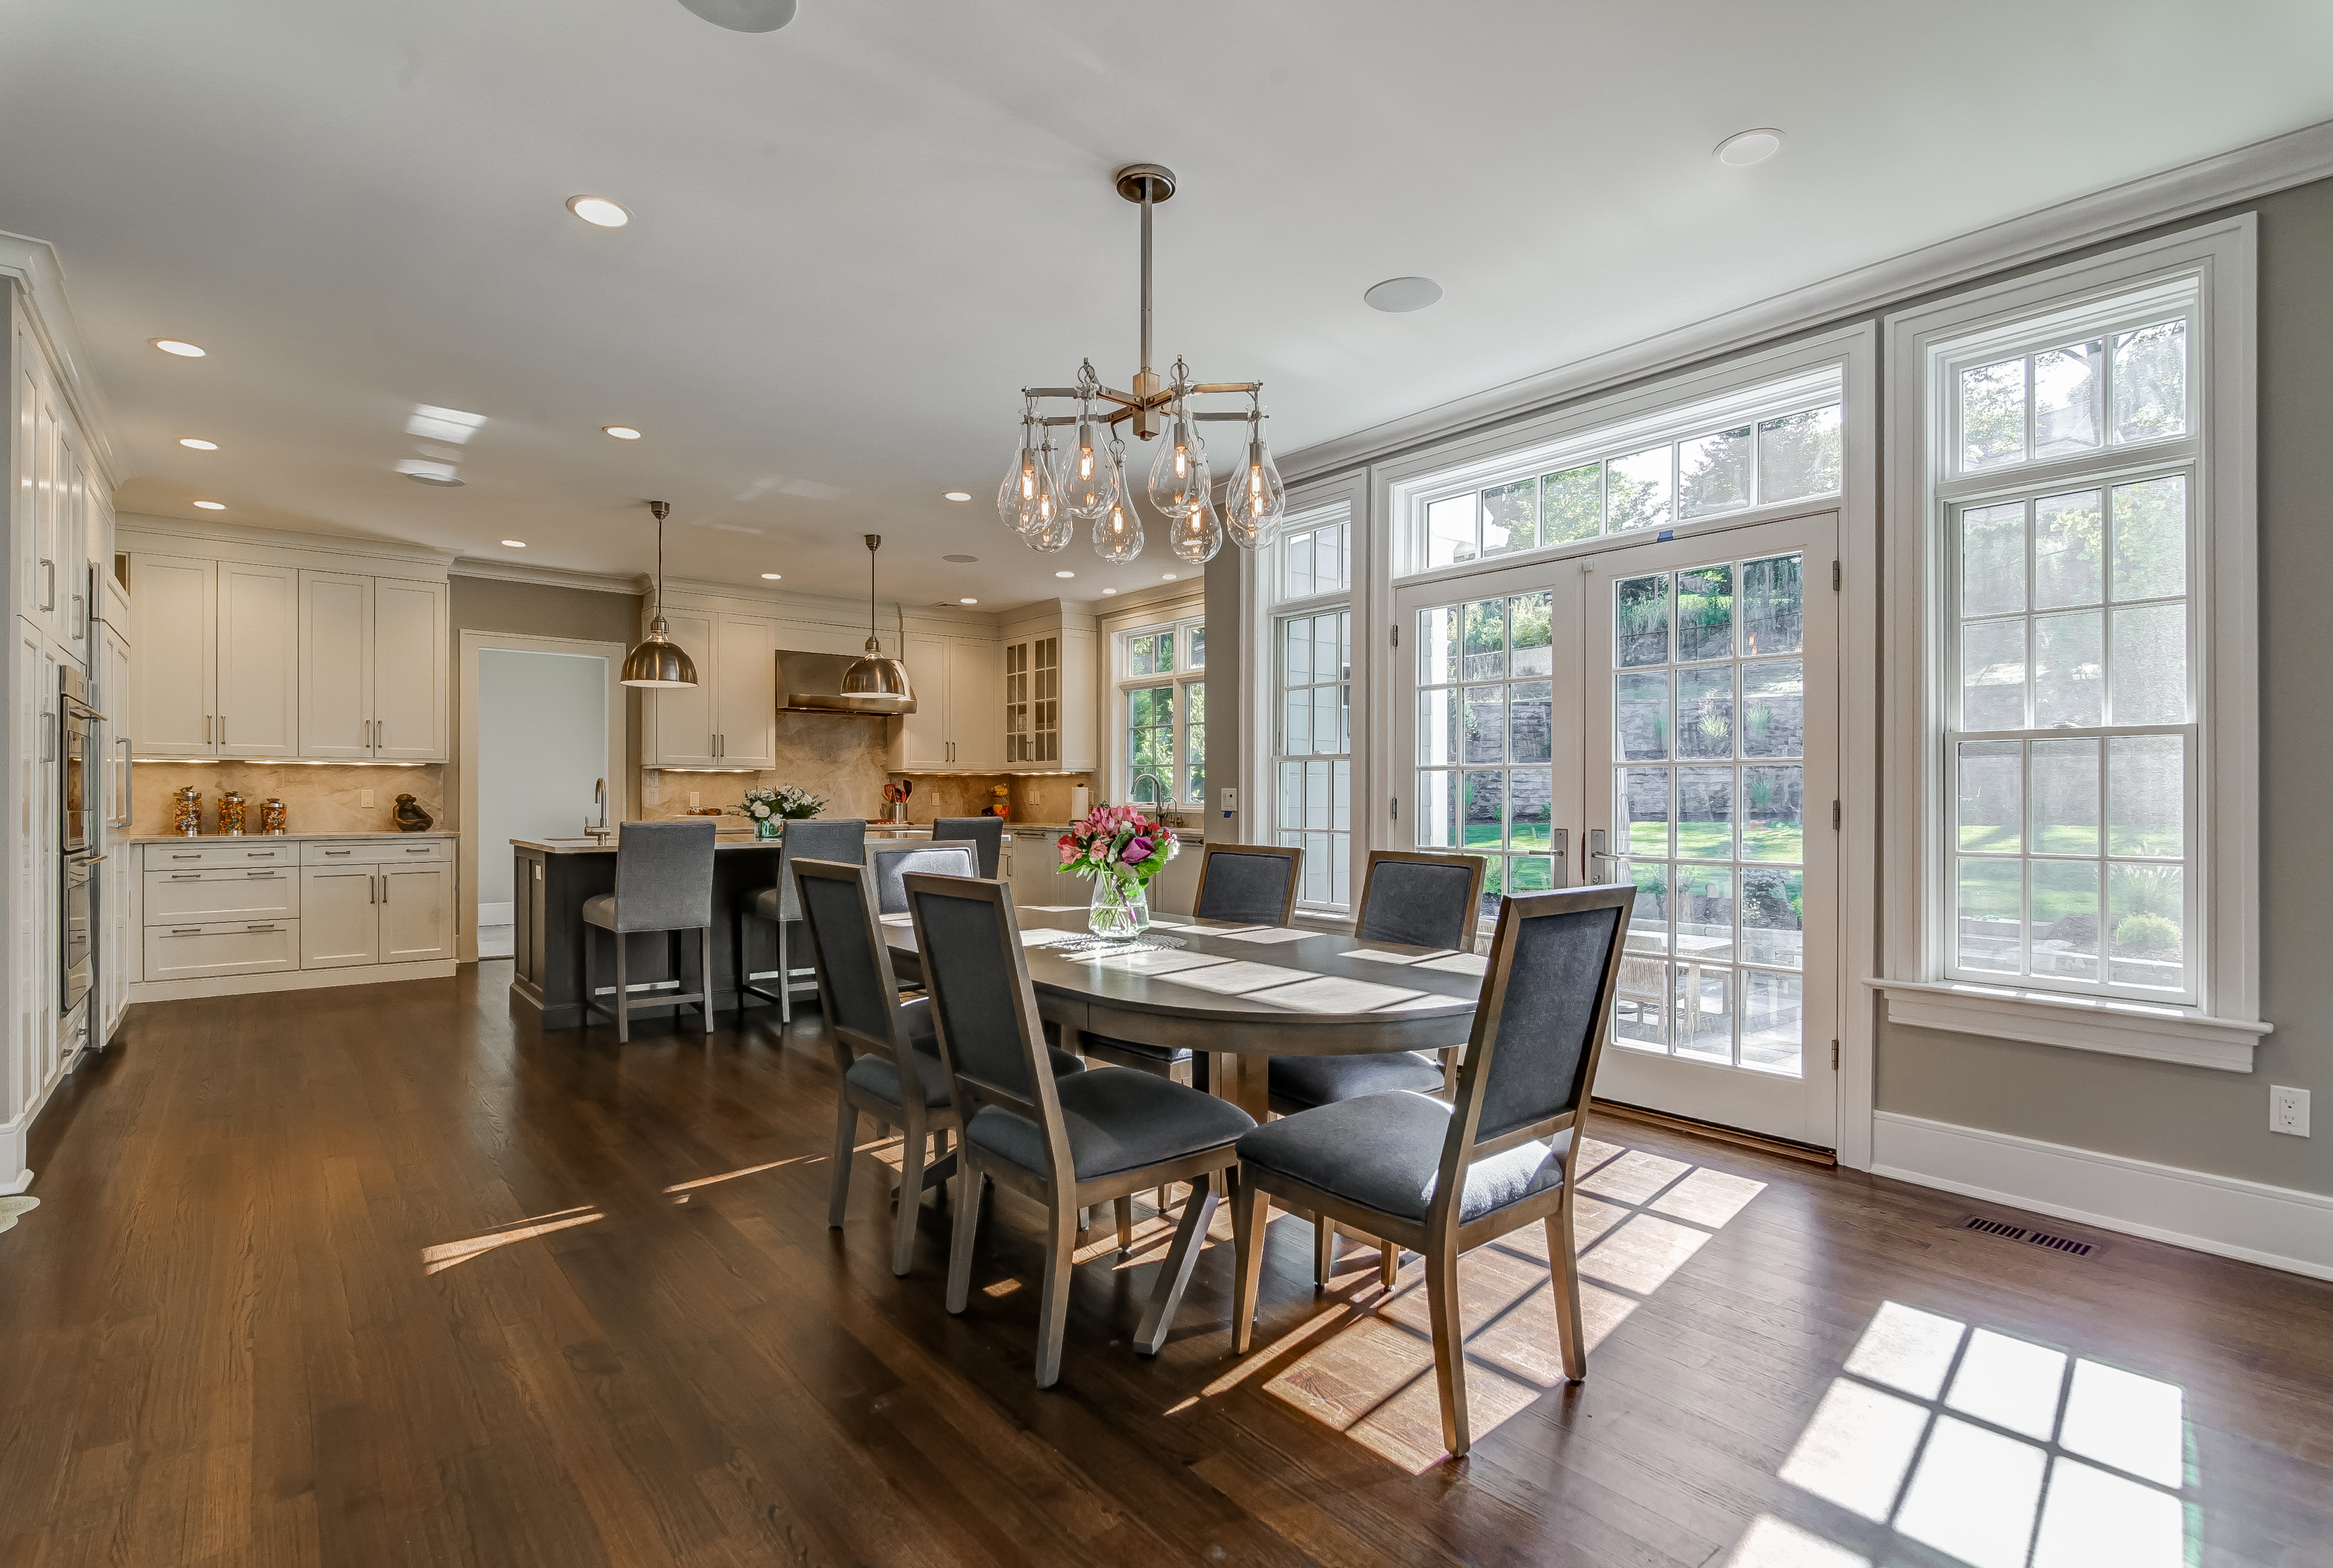 8 – Gourmet Eat-in Kitchen – 20 Troy Drive, Example of Most Recent Project from Builder